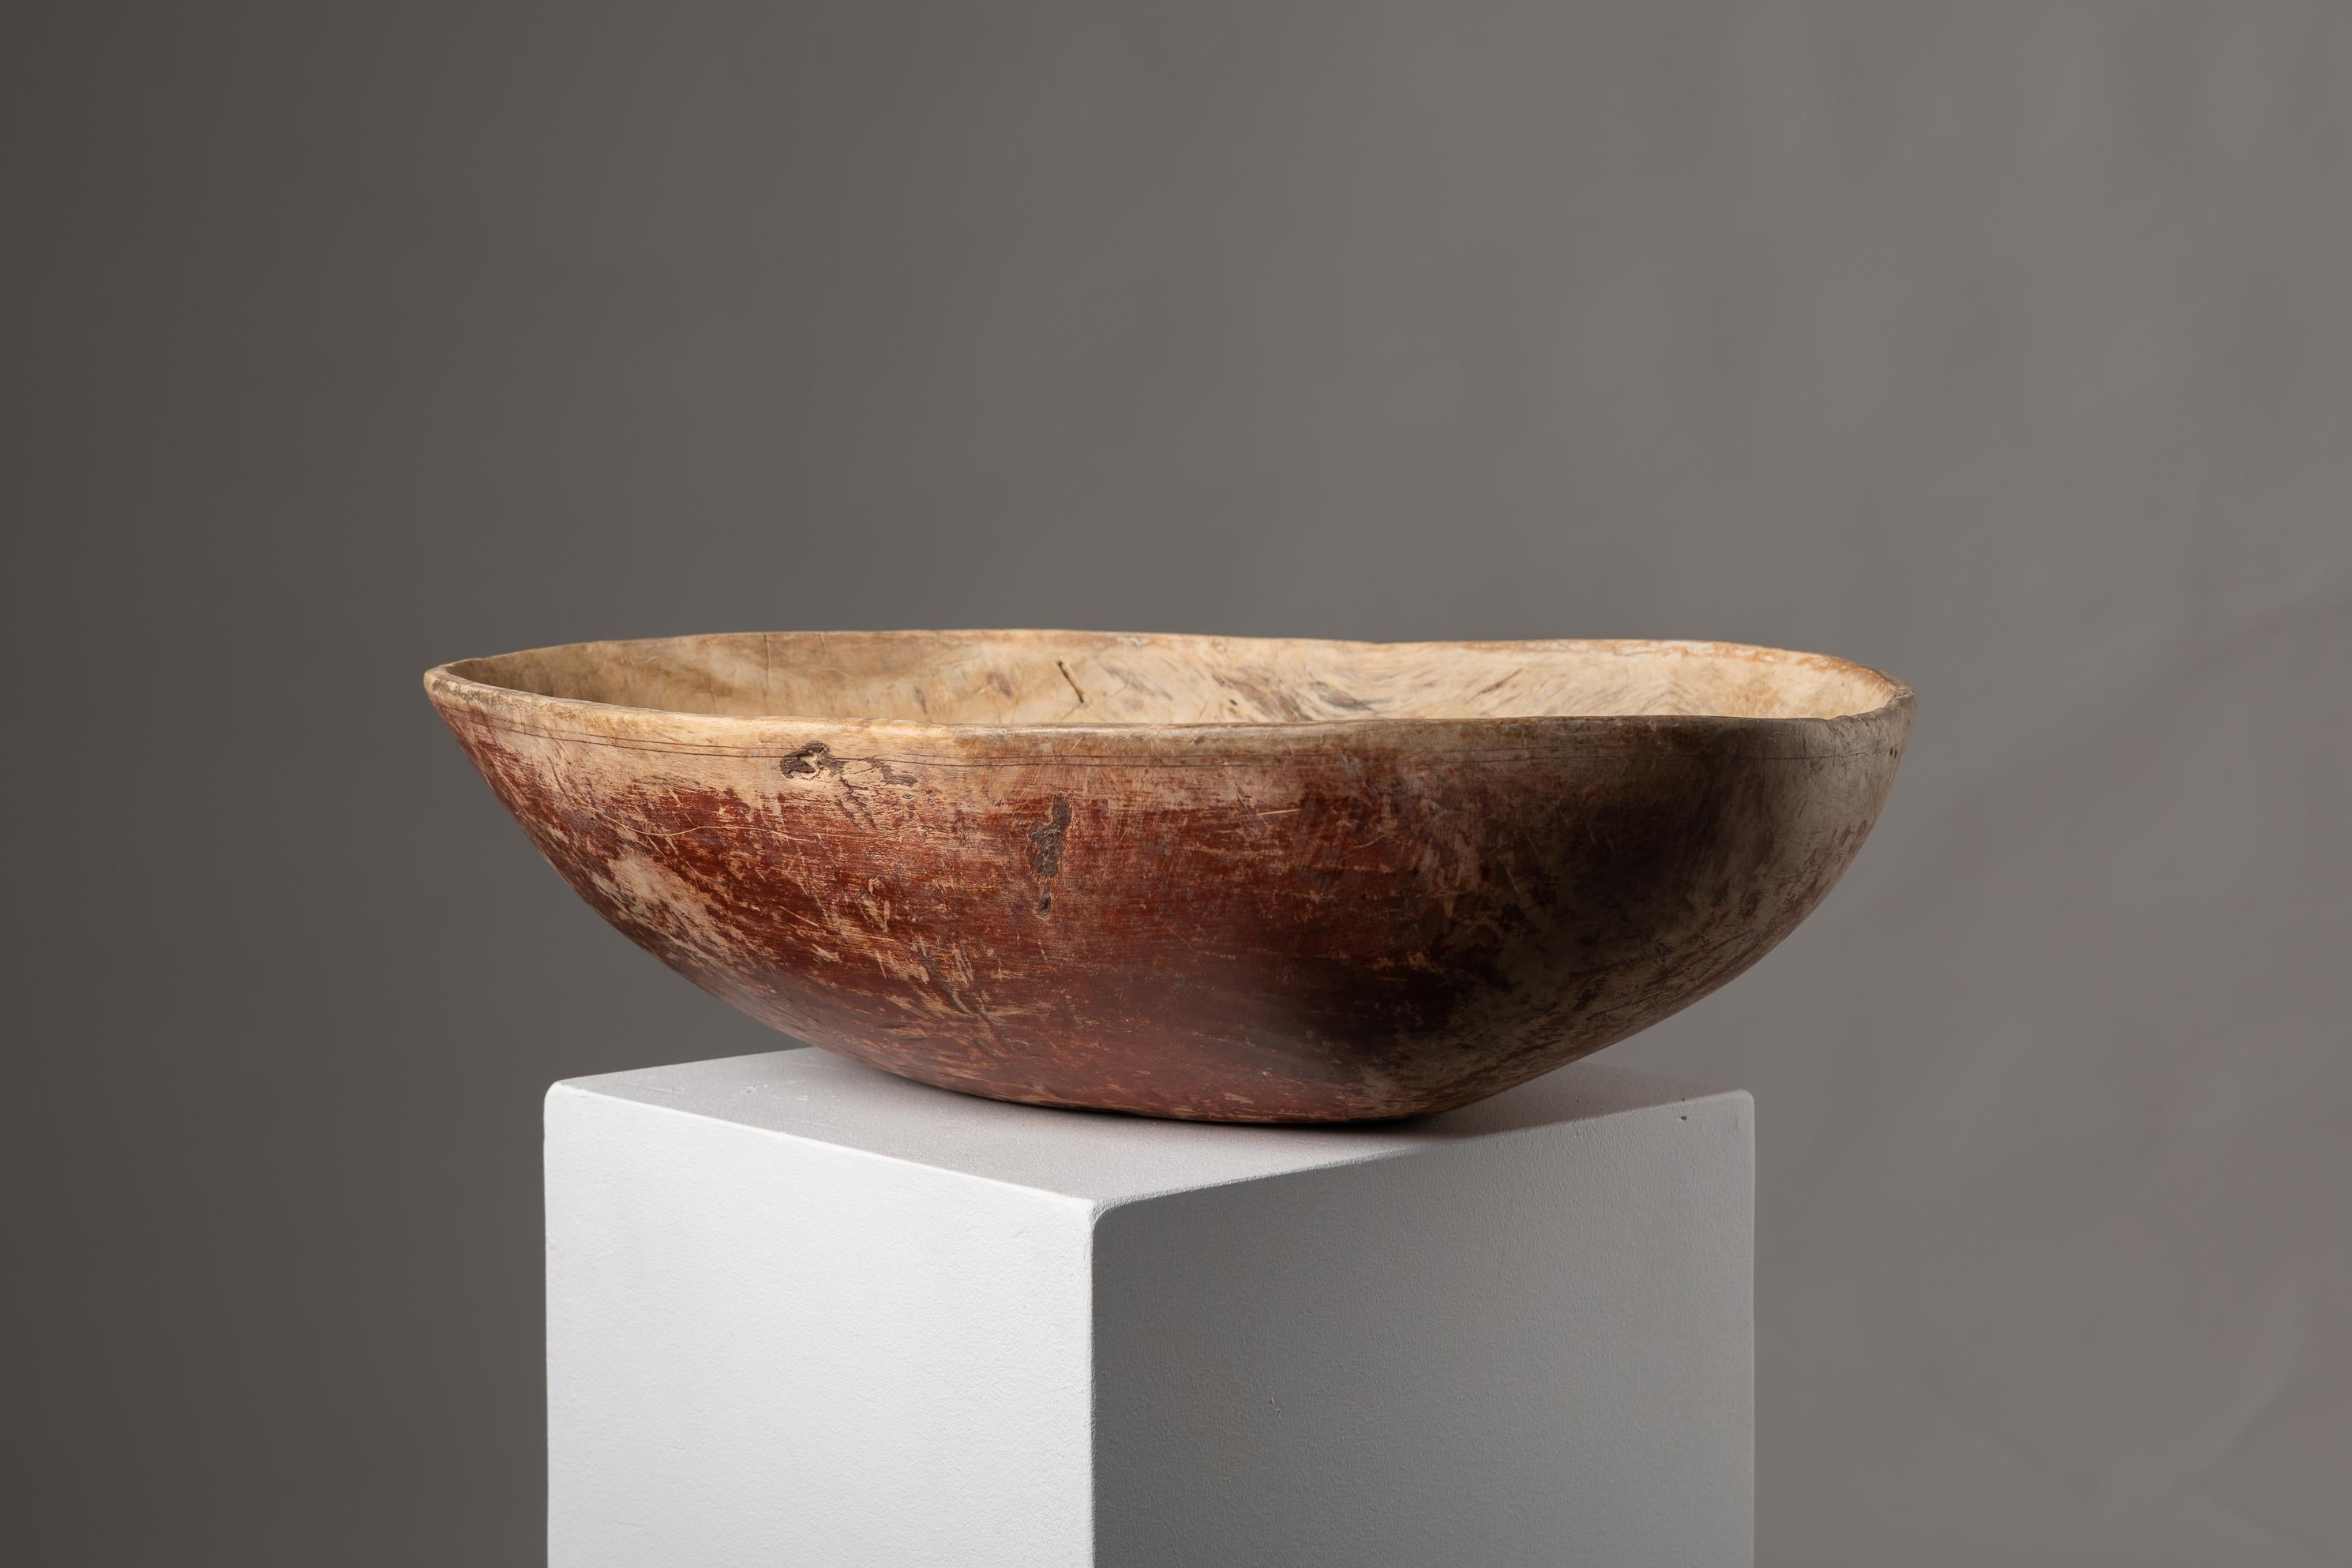 Genuine Swedish root bowl from the 1800s. The wood bowl is in good condition with an authentic patina and organic shape. This bowl is a very large example and fit for both functional and aesthetic purposes. The size ensures it stands out on any